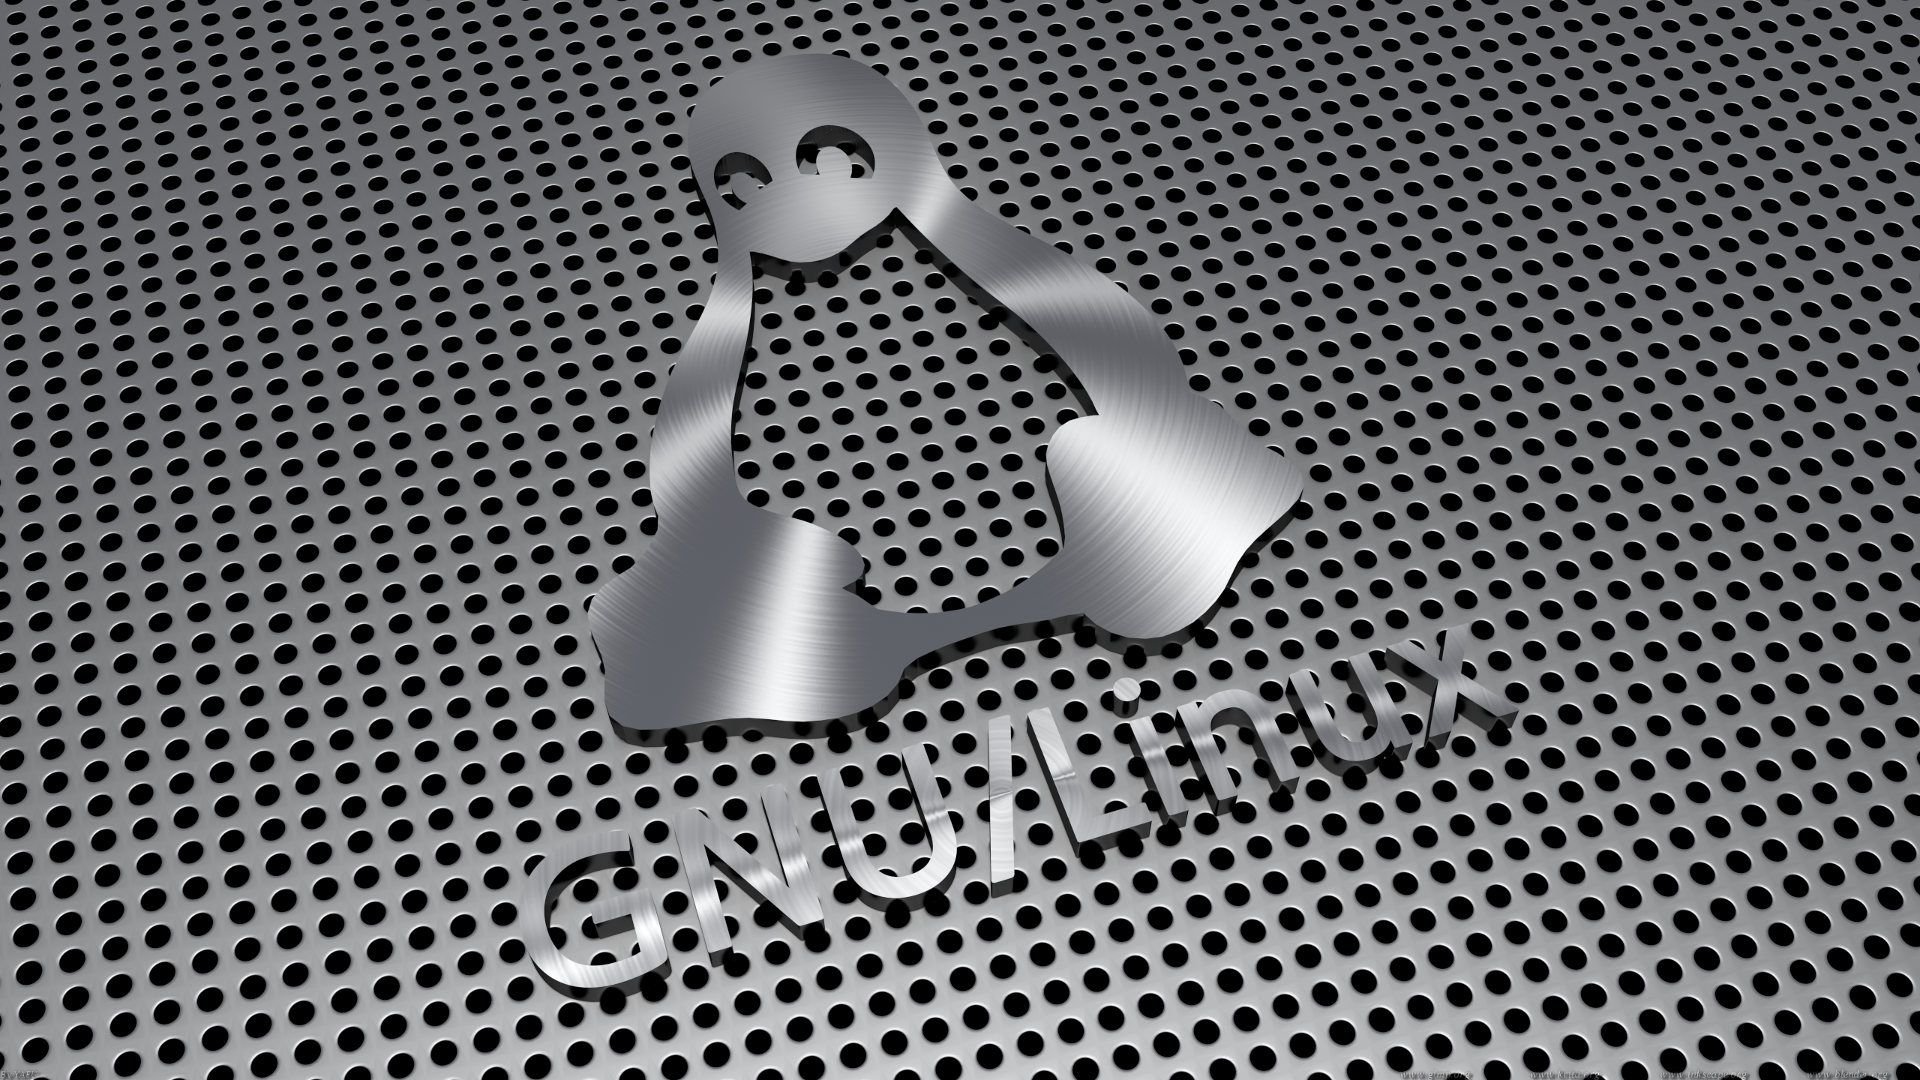 Related to OpenSource Brushed Metal Wallpaper on Grid Projects Artists Community